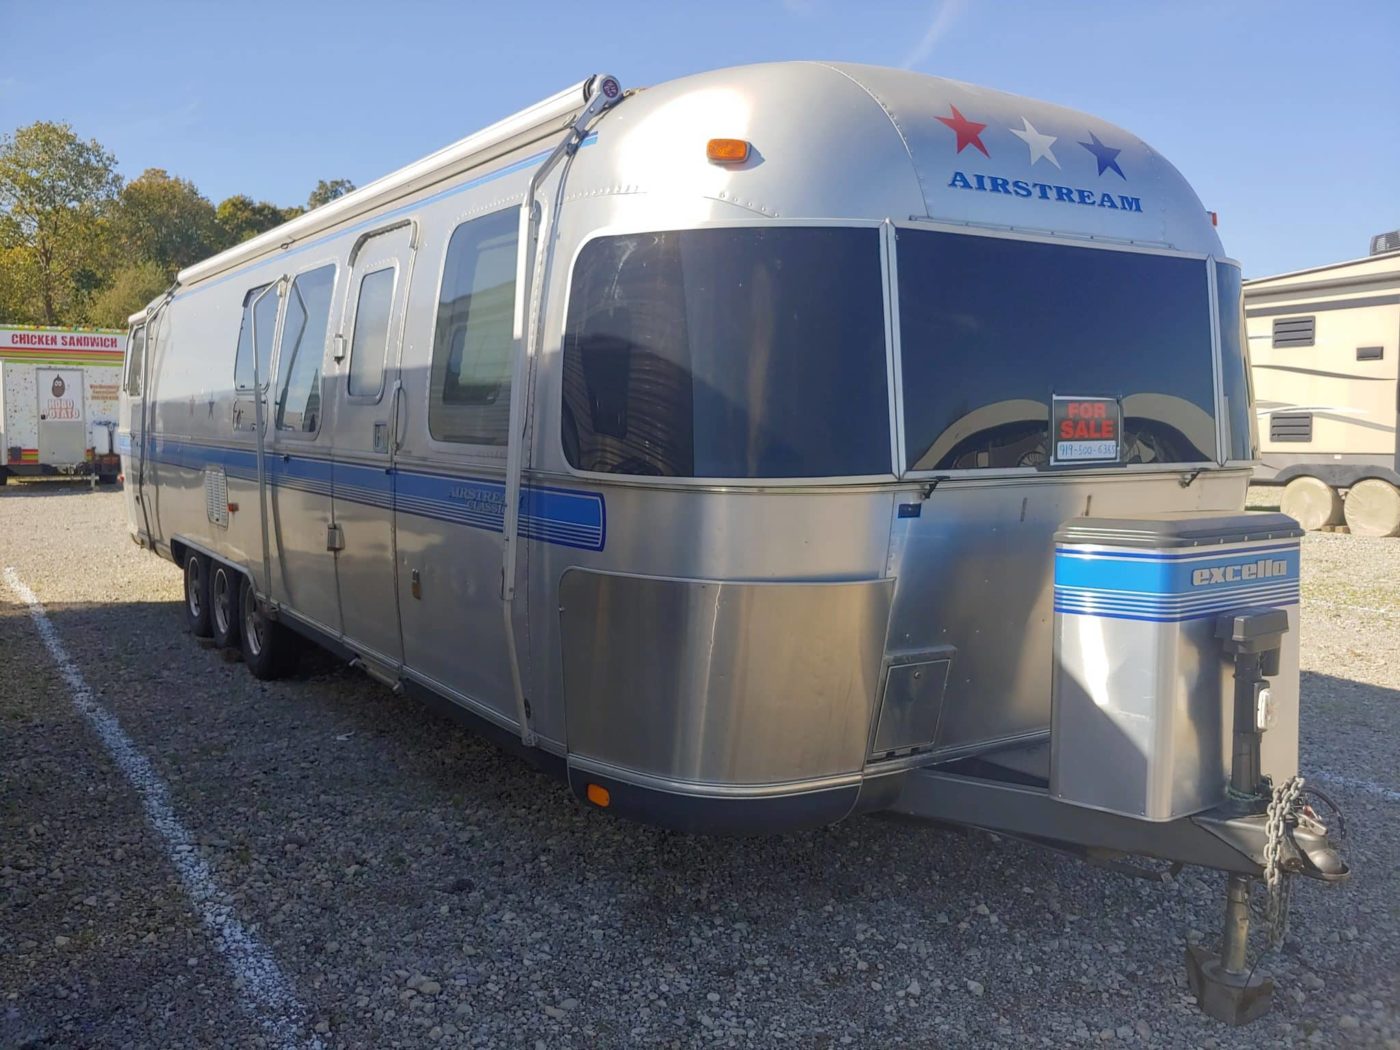 Airstream outside view from front